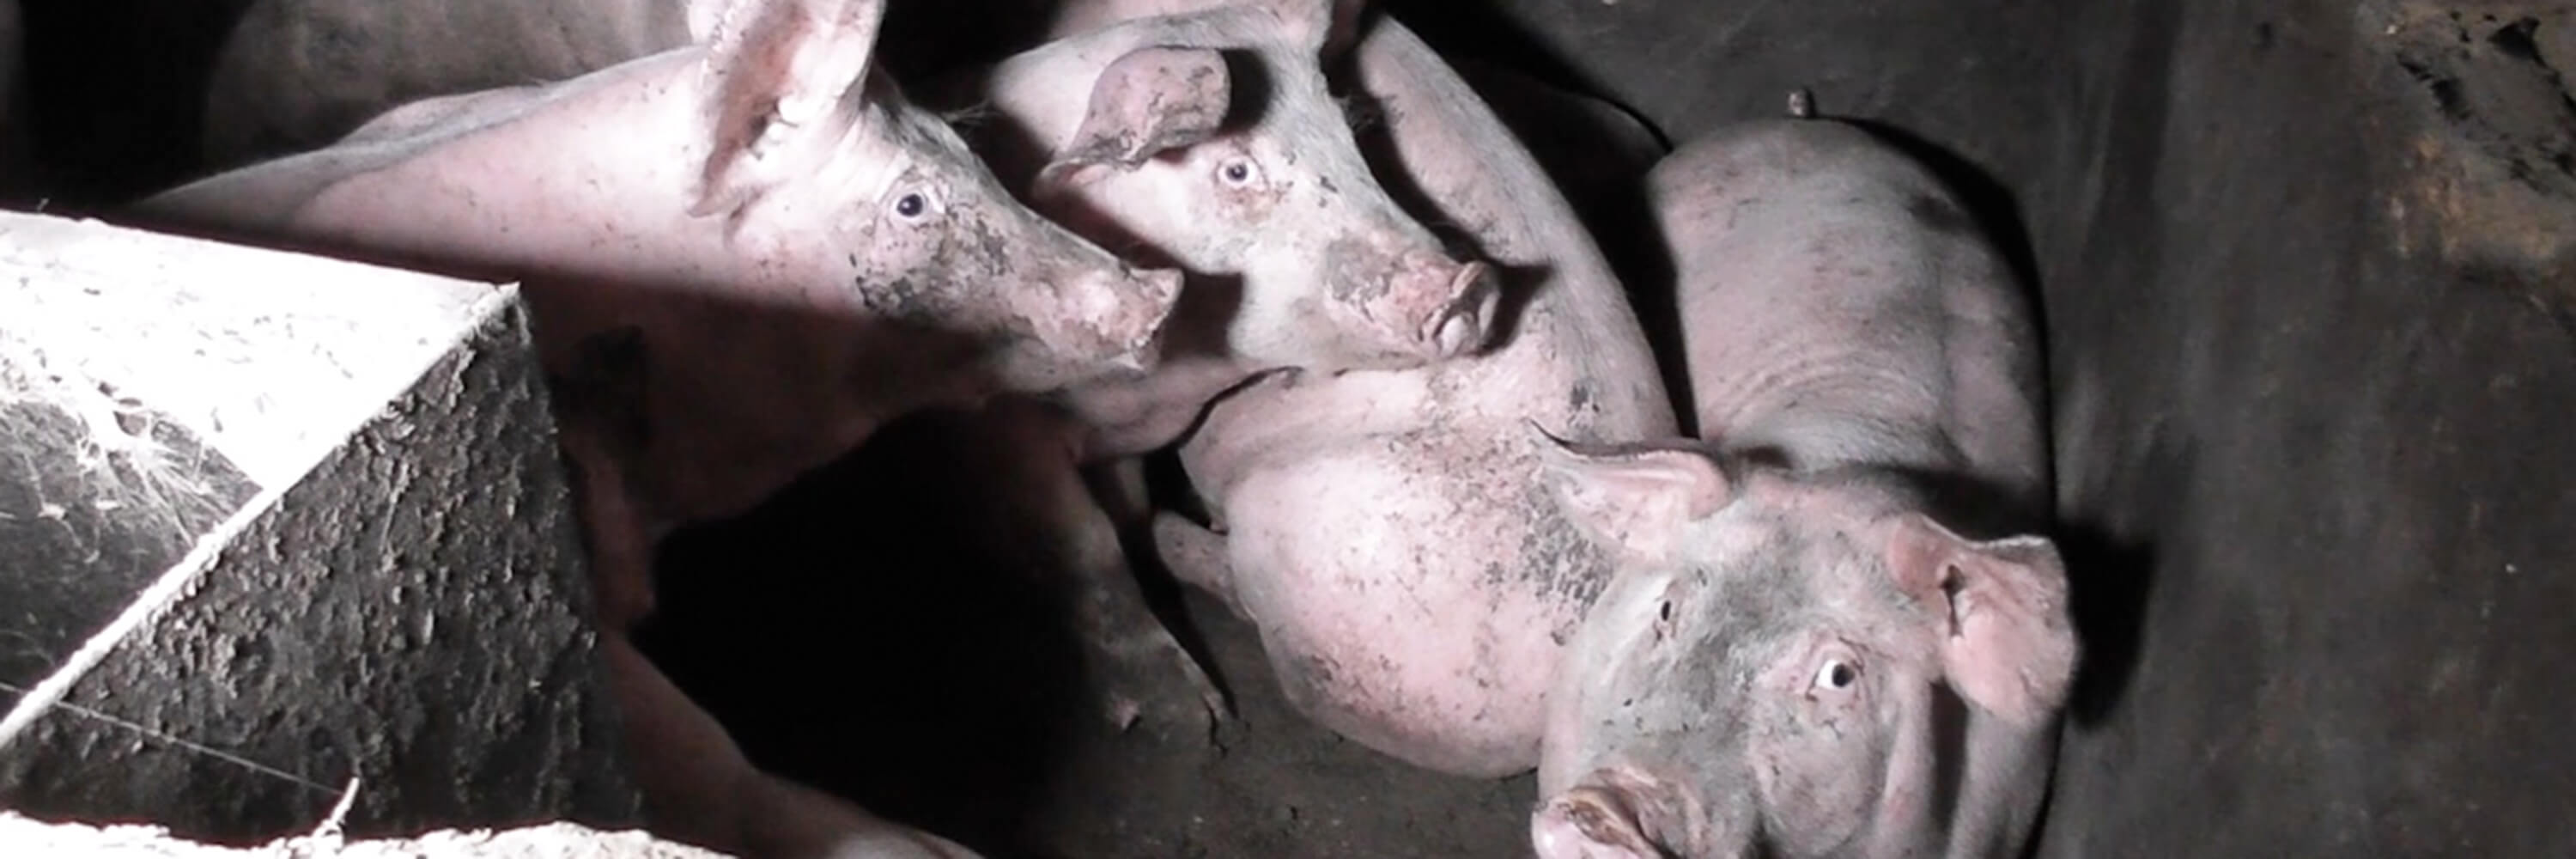 pigs on factory farm in UK